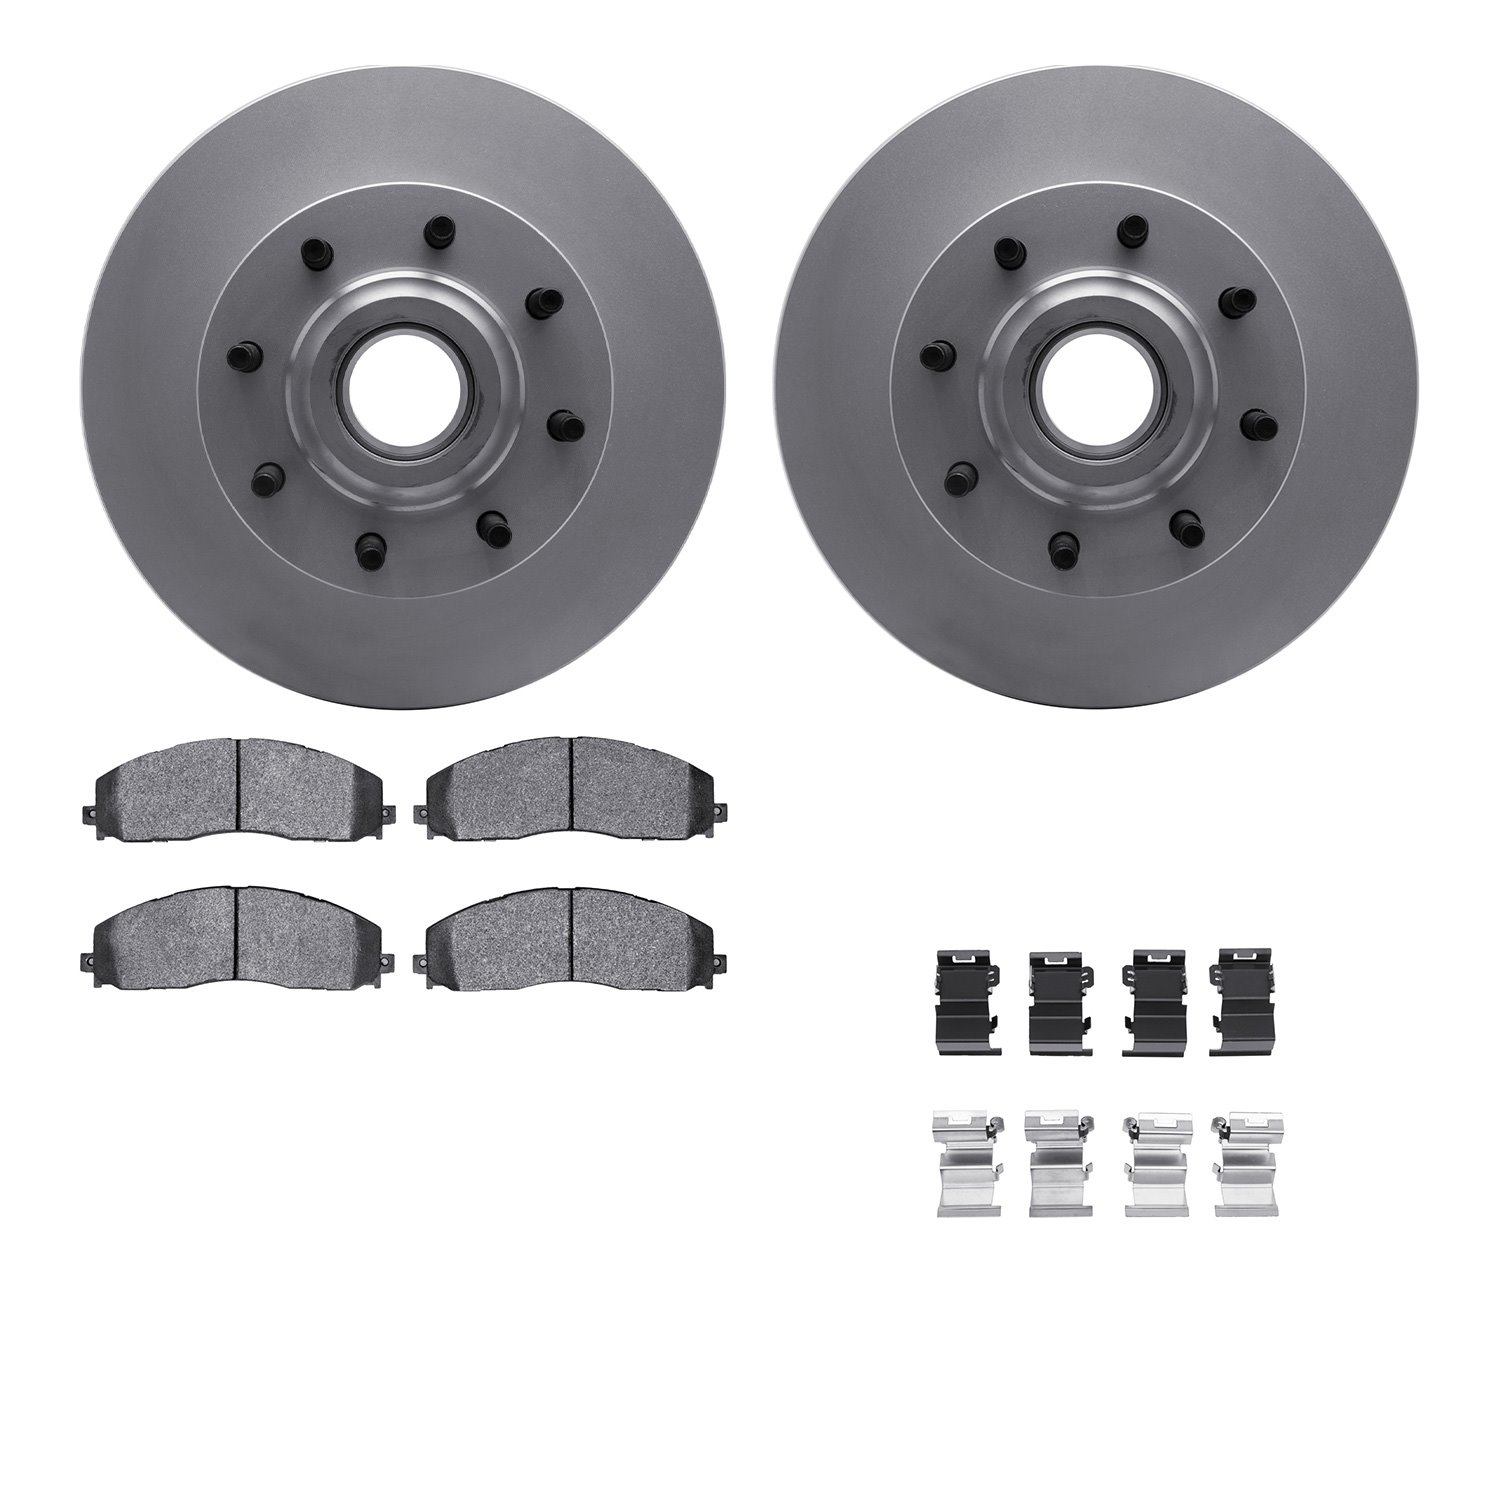 4212-99219 Geospec Brake Rotors w/Heavy-Duty Brake Pads & Hardware, Fits Select Ford/Lincoln/Mercury/Mazda, Position: Front